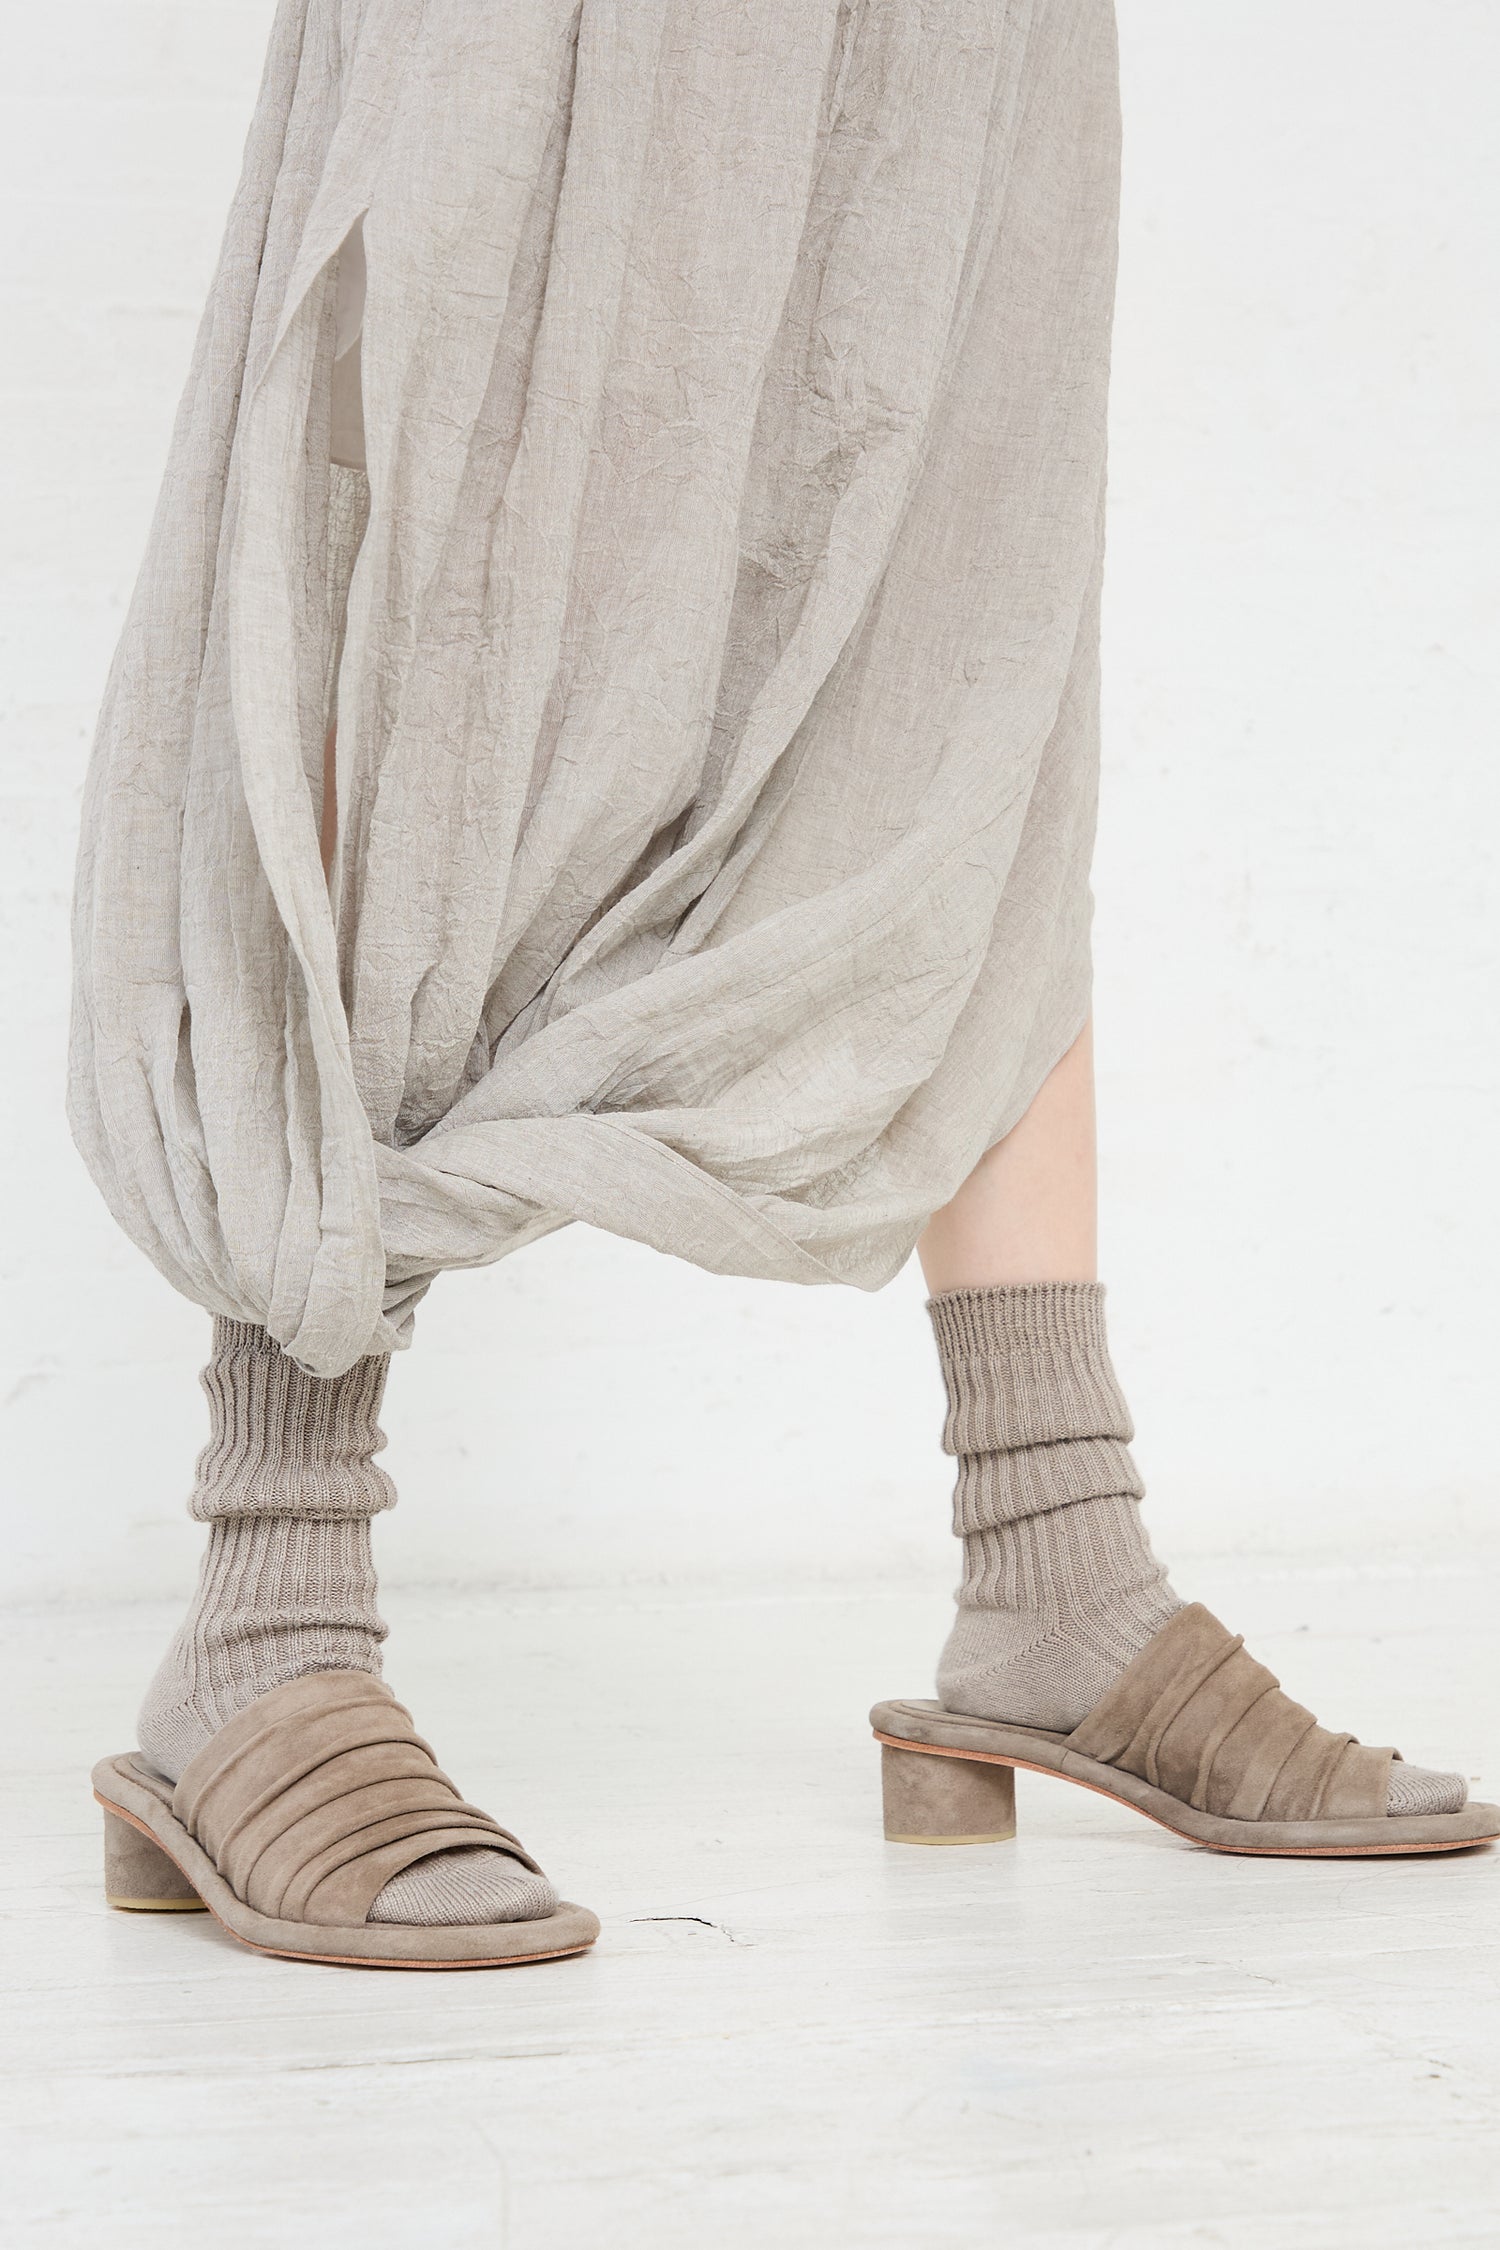 Close-up of a person's lower legs wearing beige sandals and grey socks, draped with a light grey, flowing Lauren Manoogian Gauze Twist Skirt in Ash.